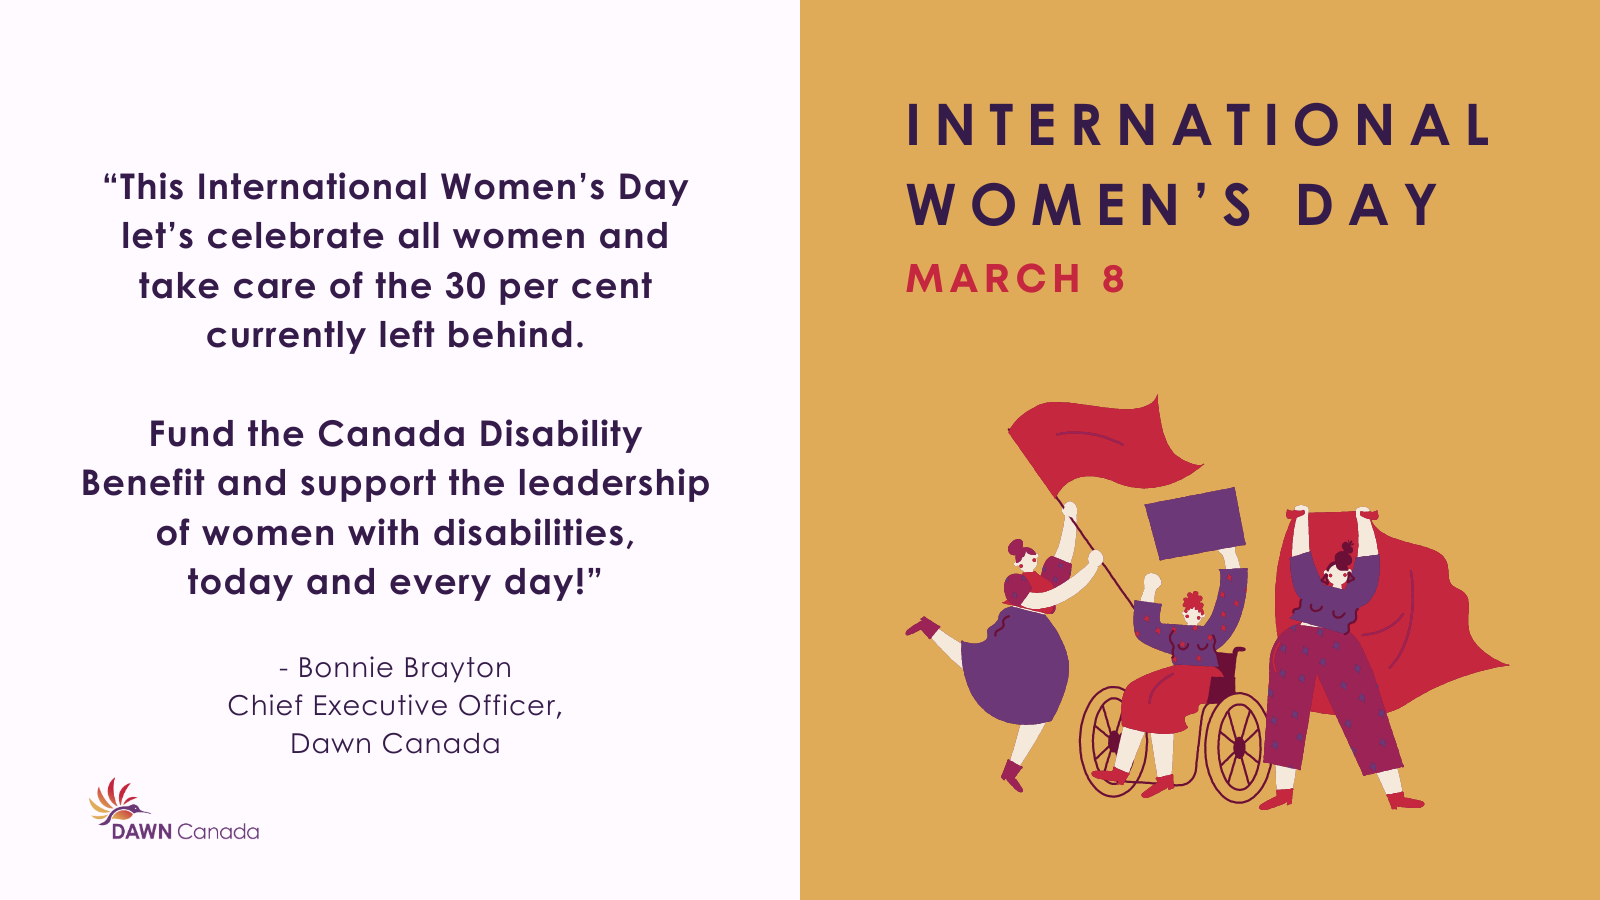 Graphic of women living with disability along with a quote from Bonnie Brayton, CEO of DAWN Canada: "This International Women’s Day let’s celebrate all women and take care of the 30 per cent currently left behind. Fund the Canada Disability Benefit and support the leadership of women with disabilities, today and every day!" 